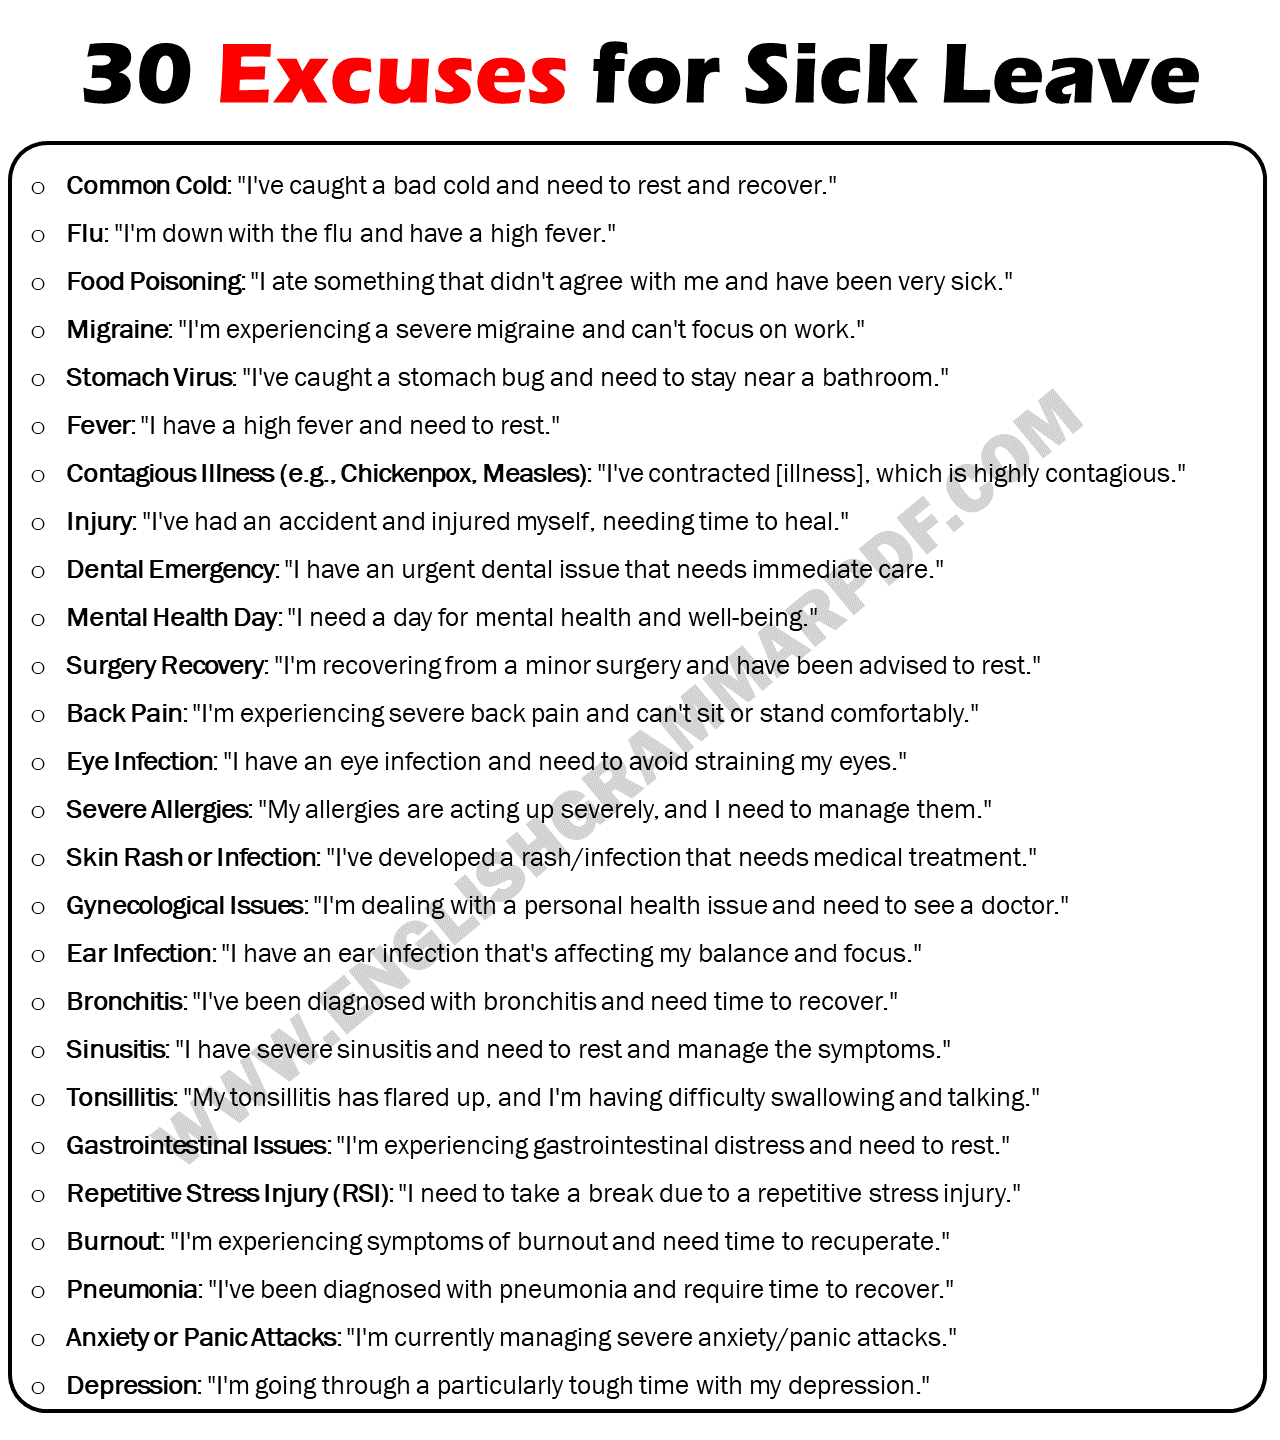 30 Excuses for Sick Leave